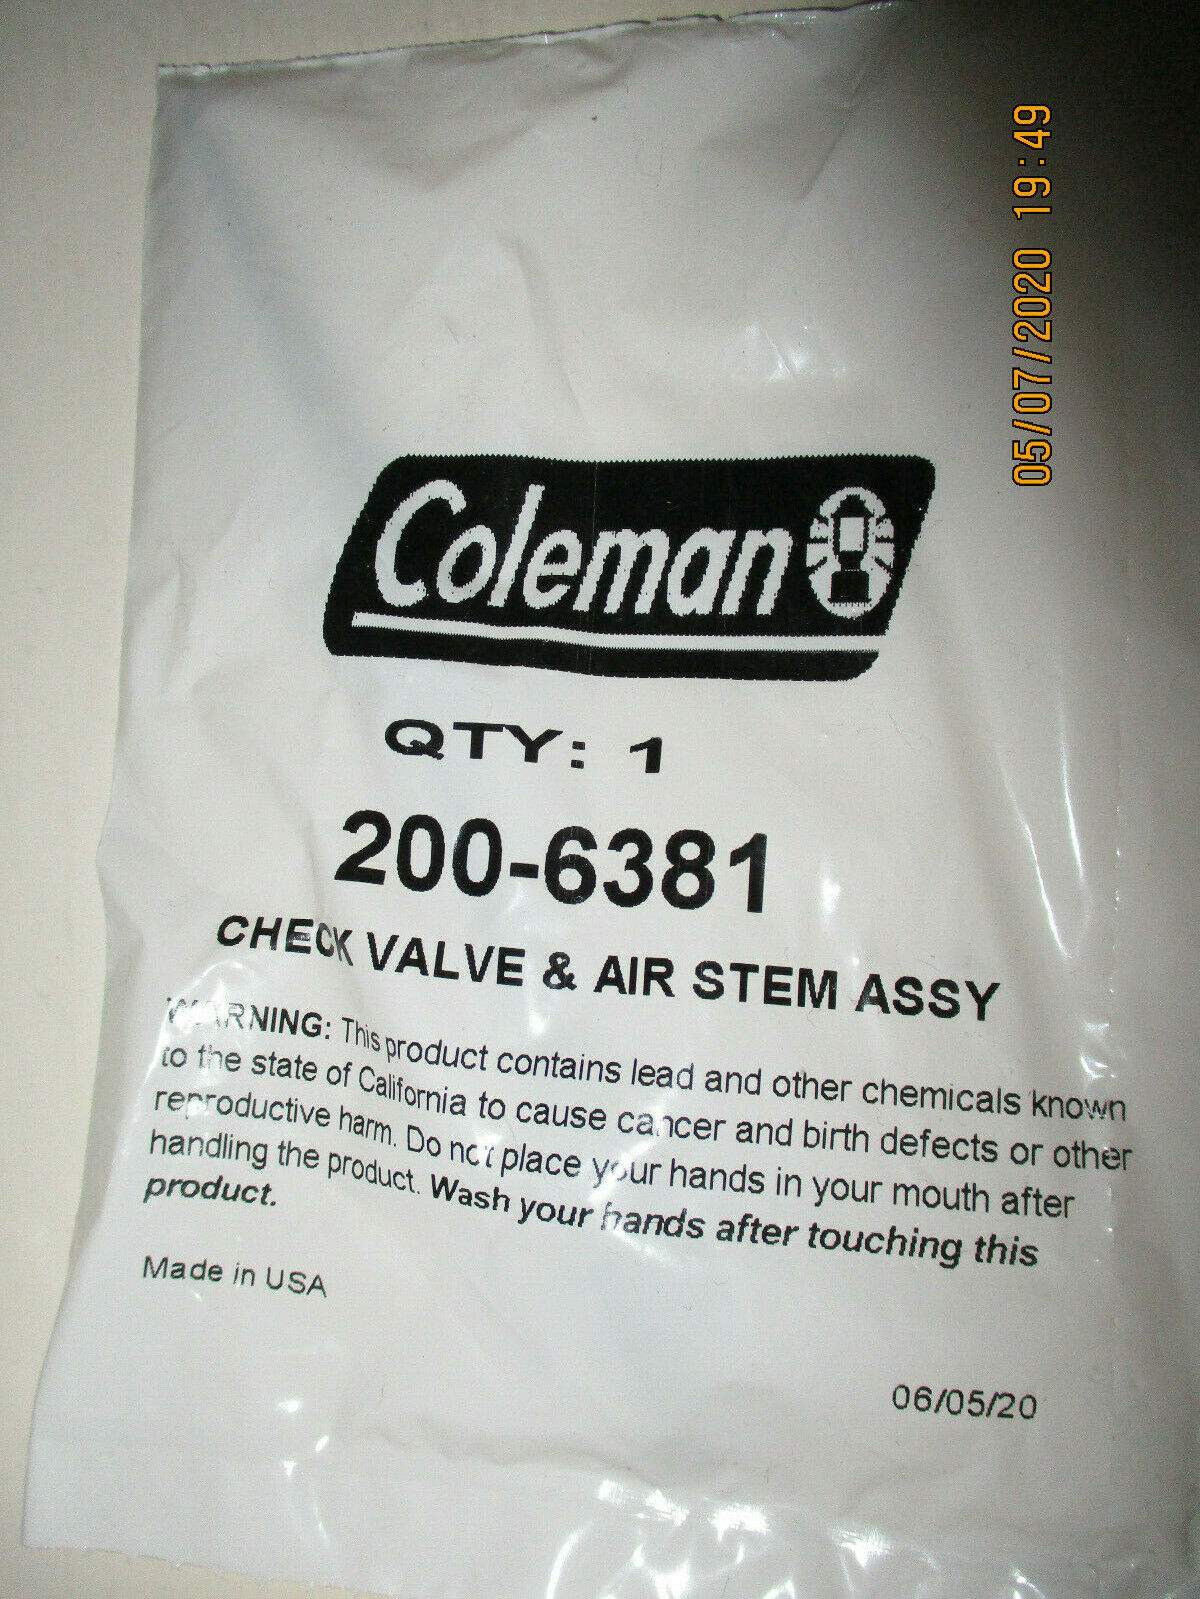 Coleman Check Valve & Air Stem Assembly # 200-6381 Lanterns And Stoves